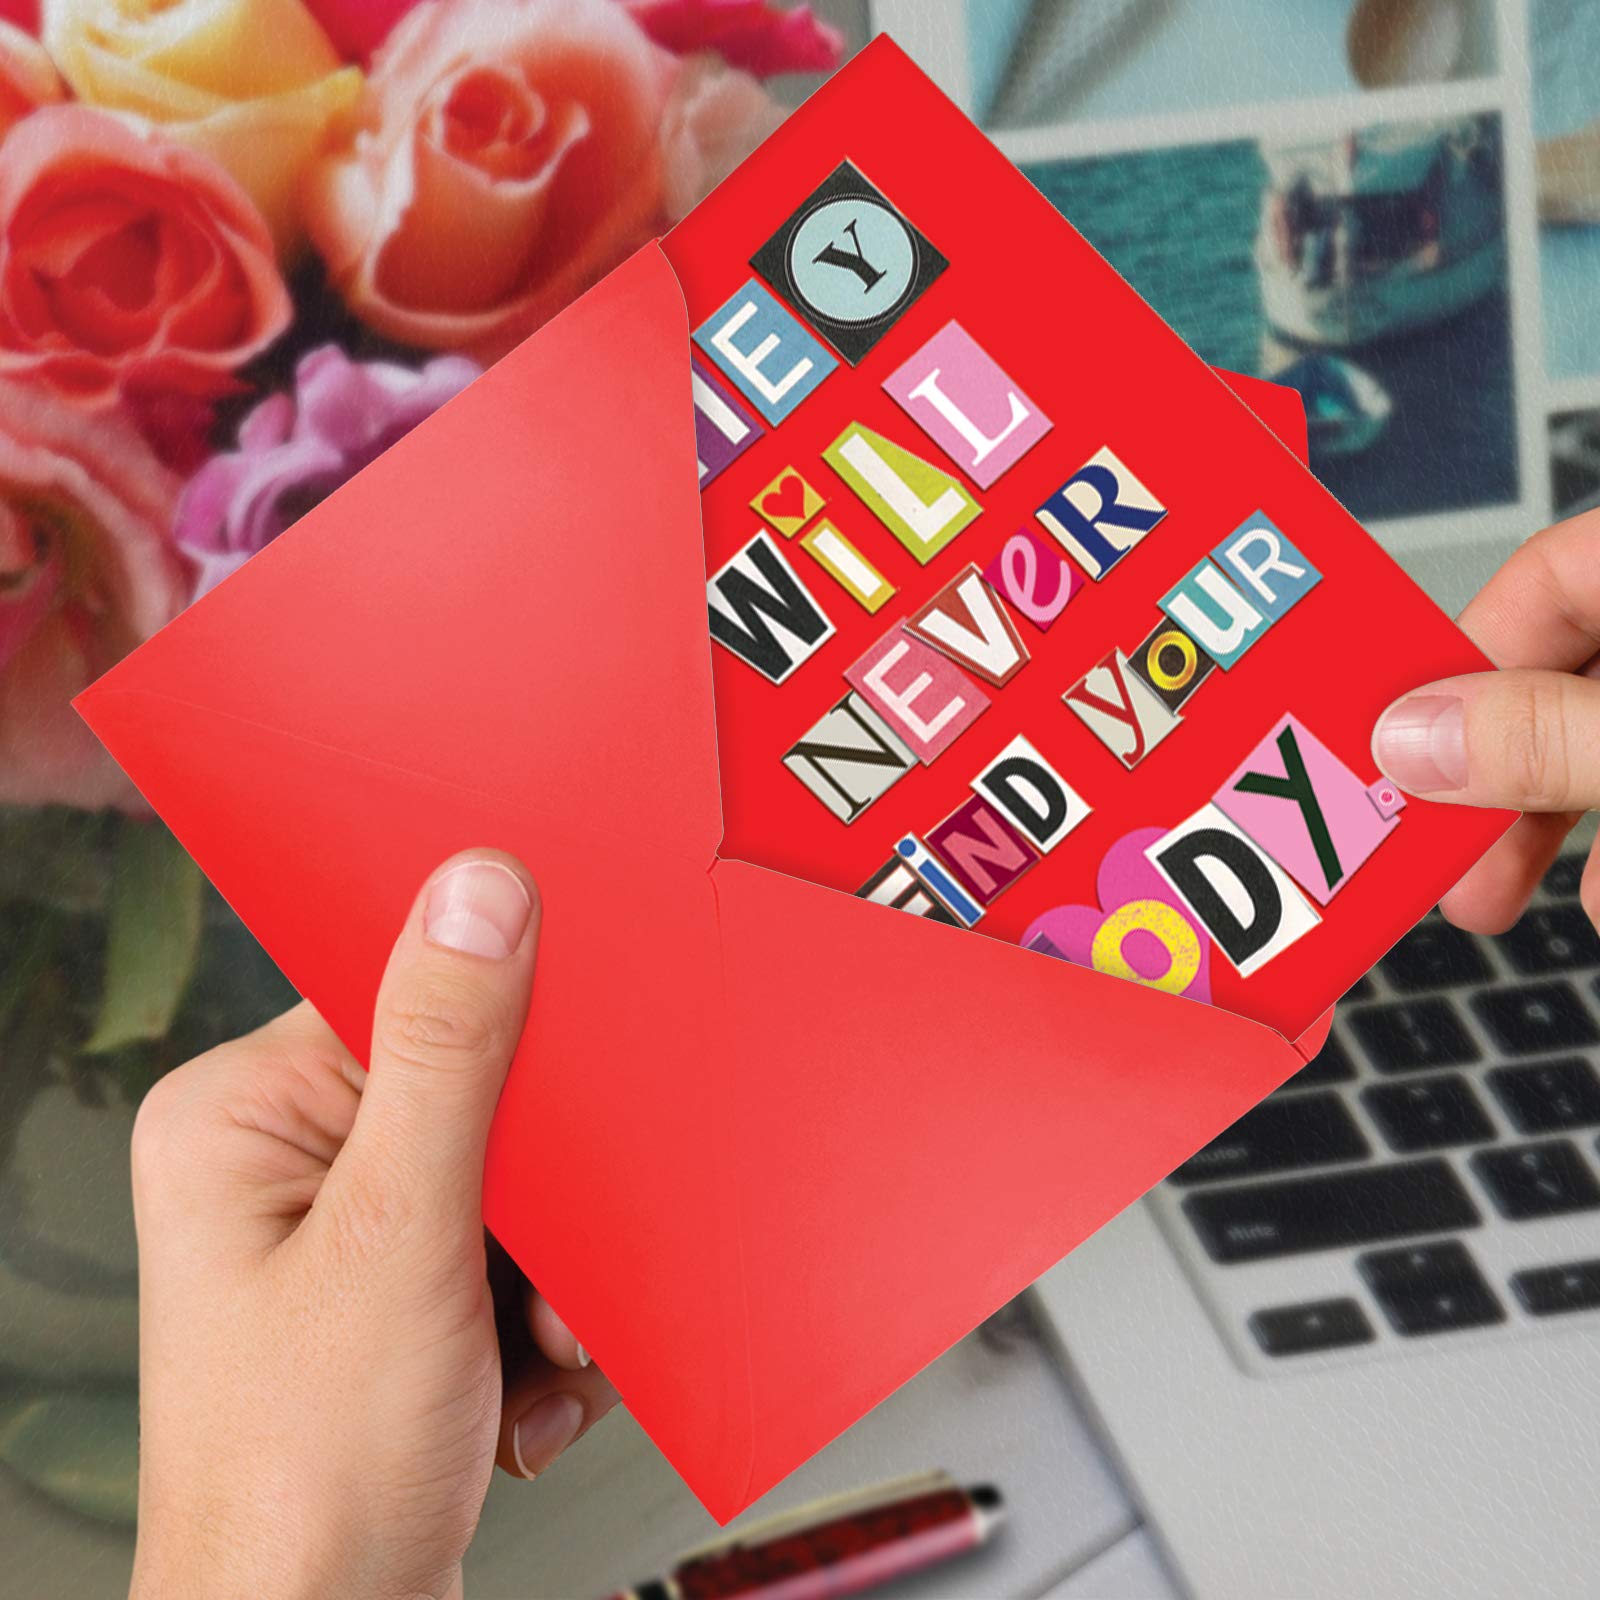 NobleWorks - Funny Card for Valentines Day - Naughty Adult Humor, Valentine Love Notecard with Envelope (1 Card) - Never Find Your Body 2151